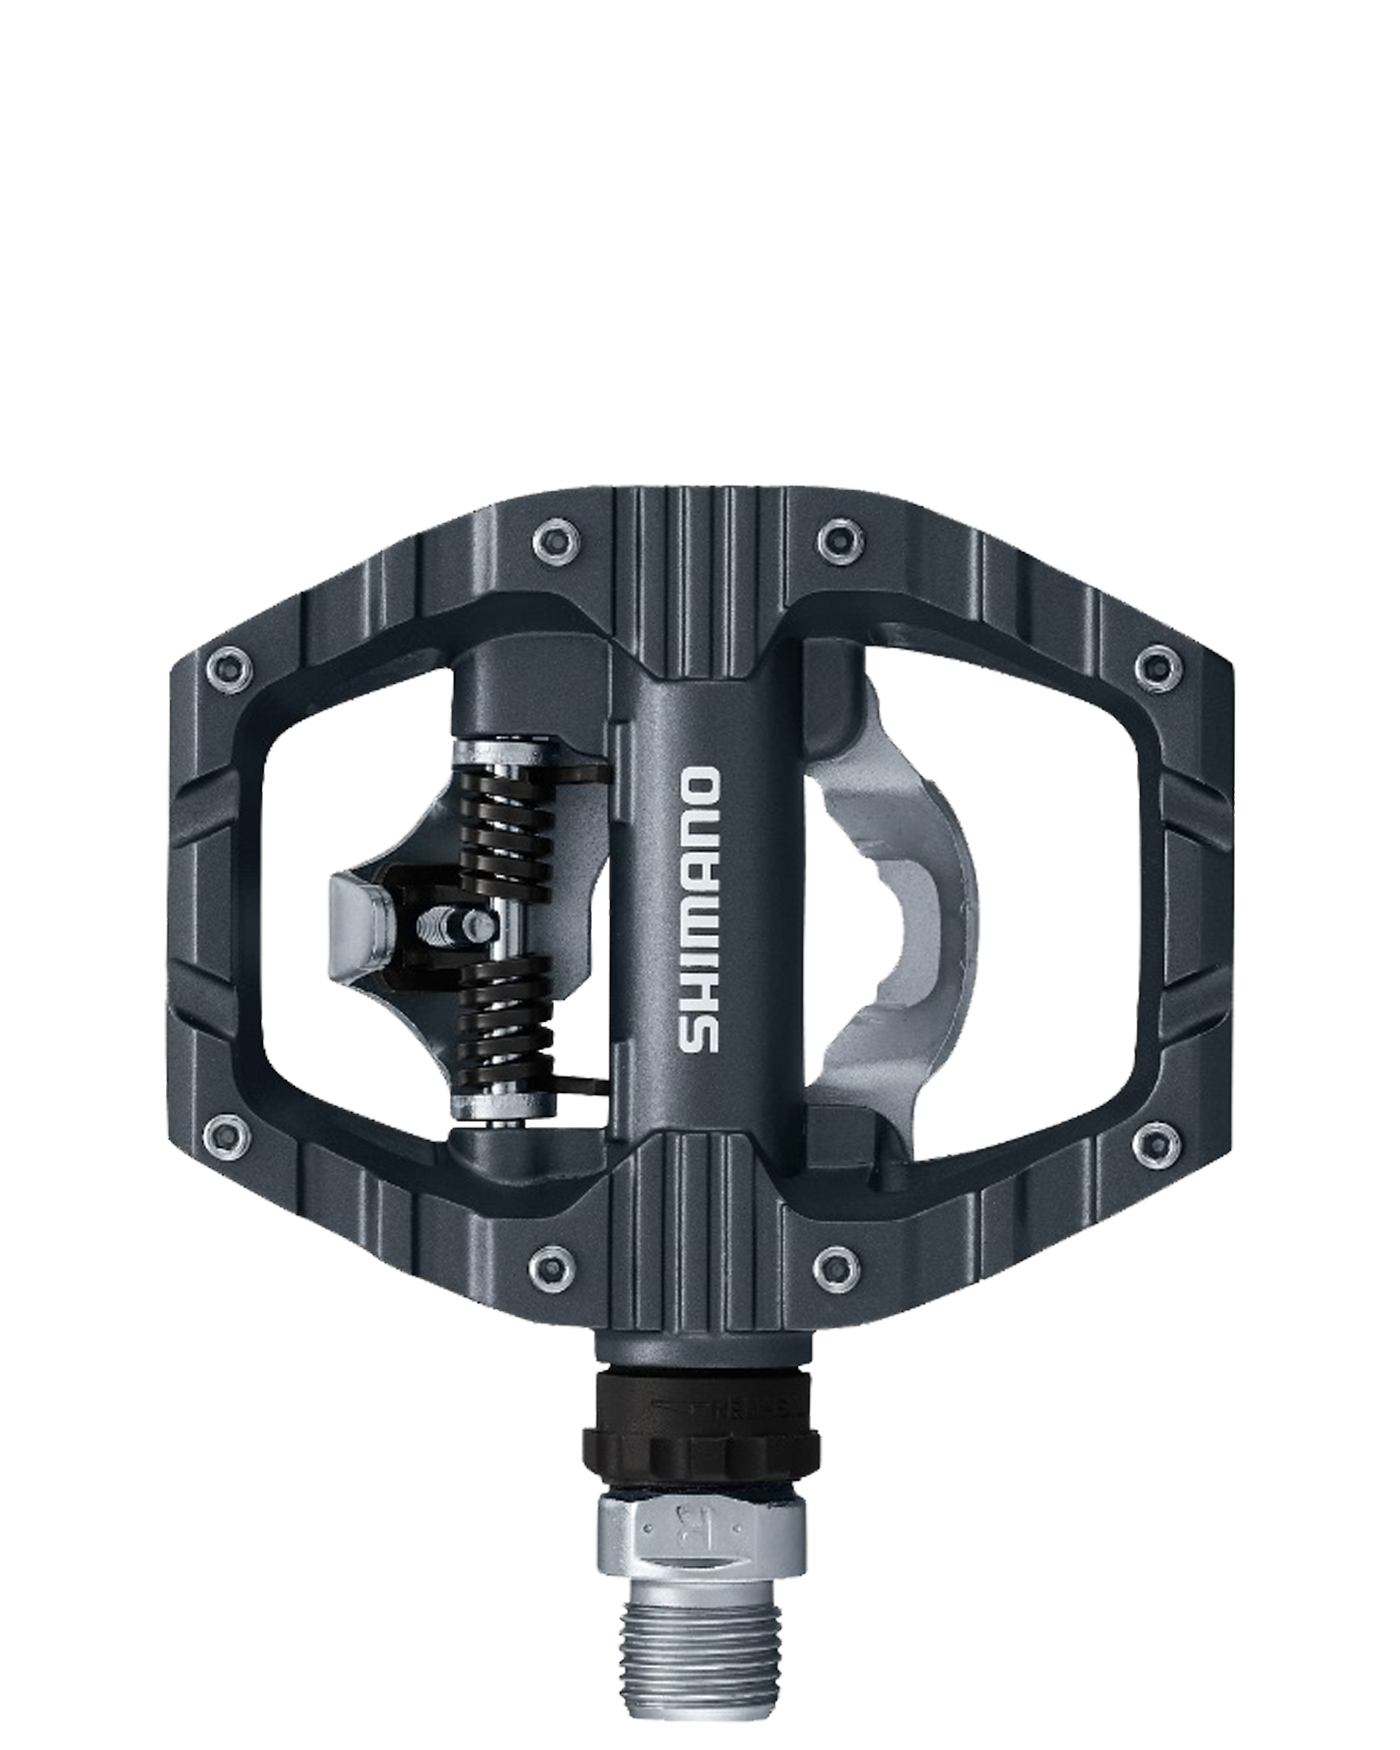 shimano gravel pedals